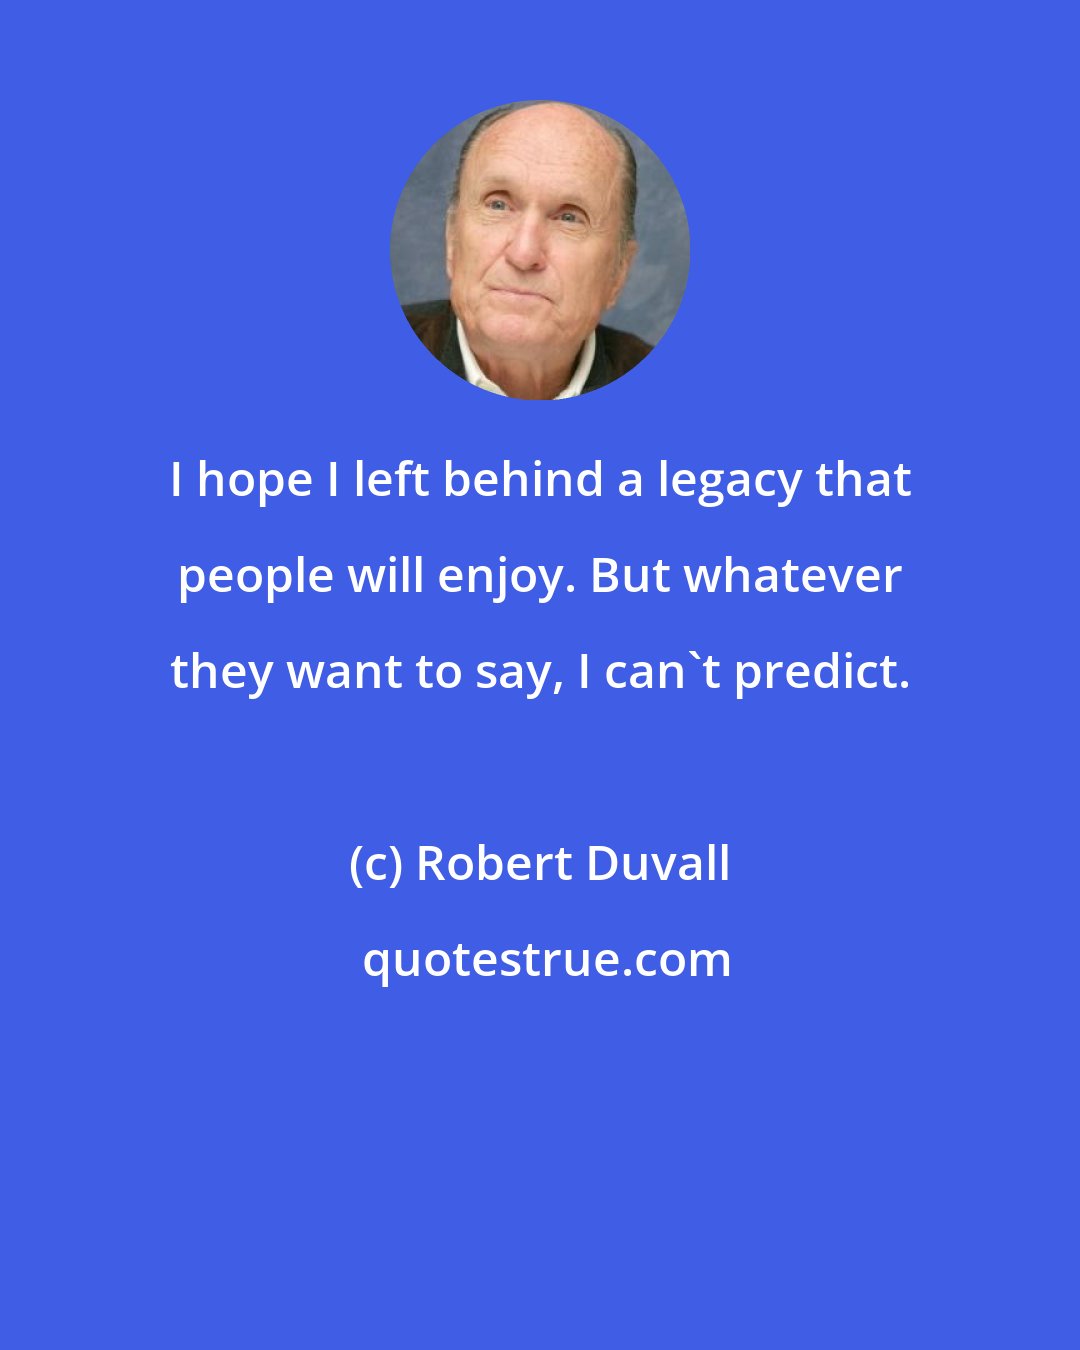 Robert Duvall: I hope I left behind a legacy that people will enjoy. But whatever they want to say, I can't predict.